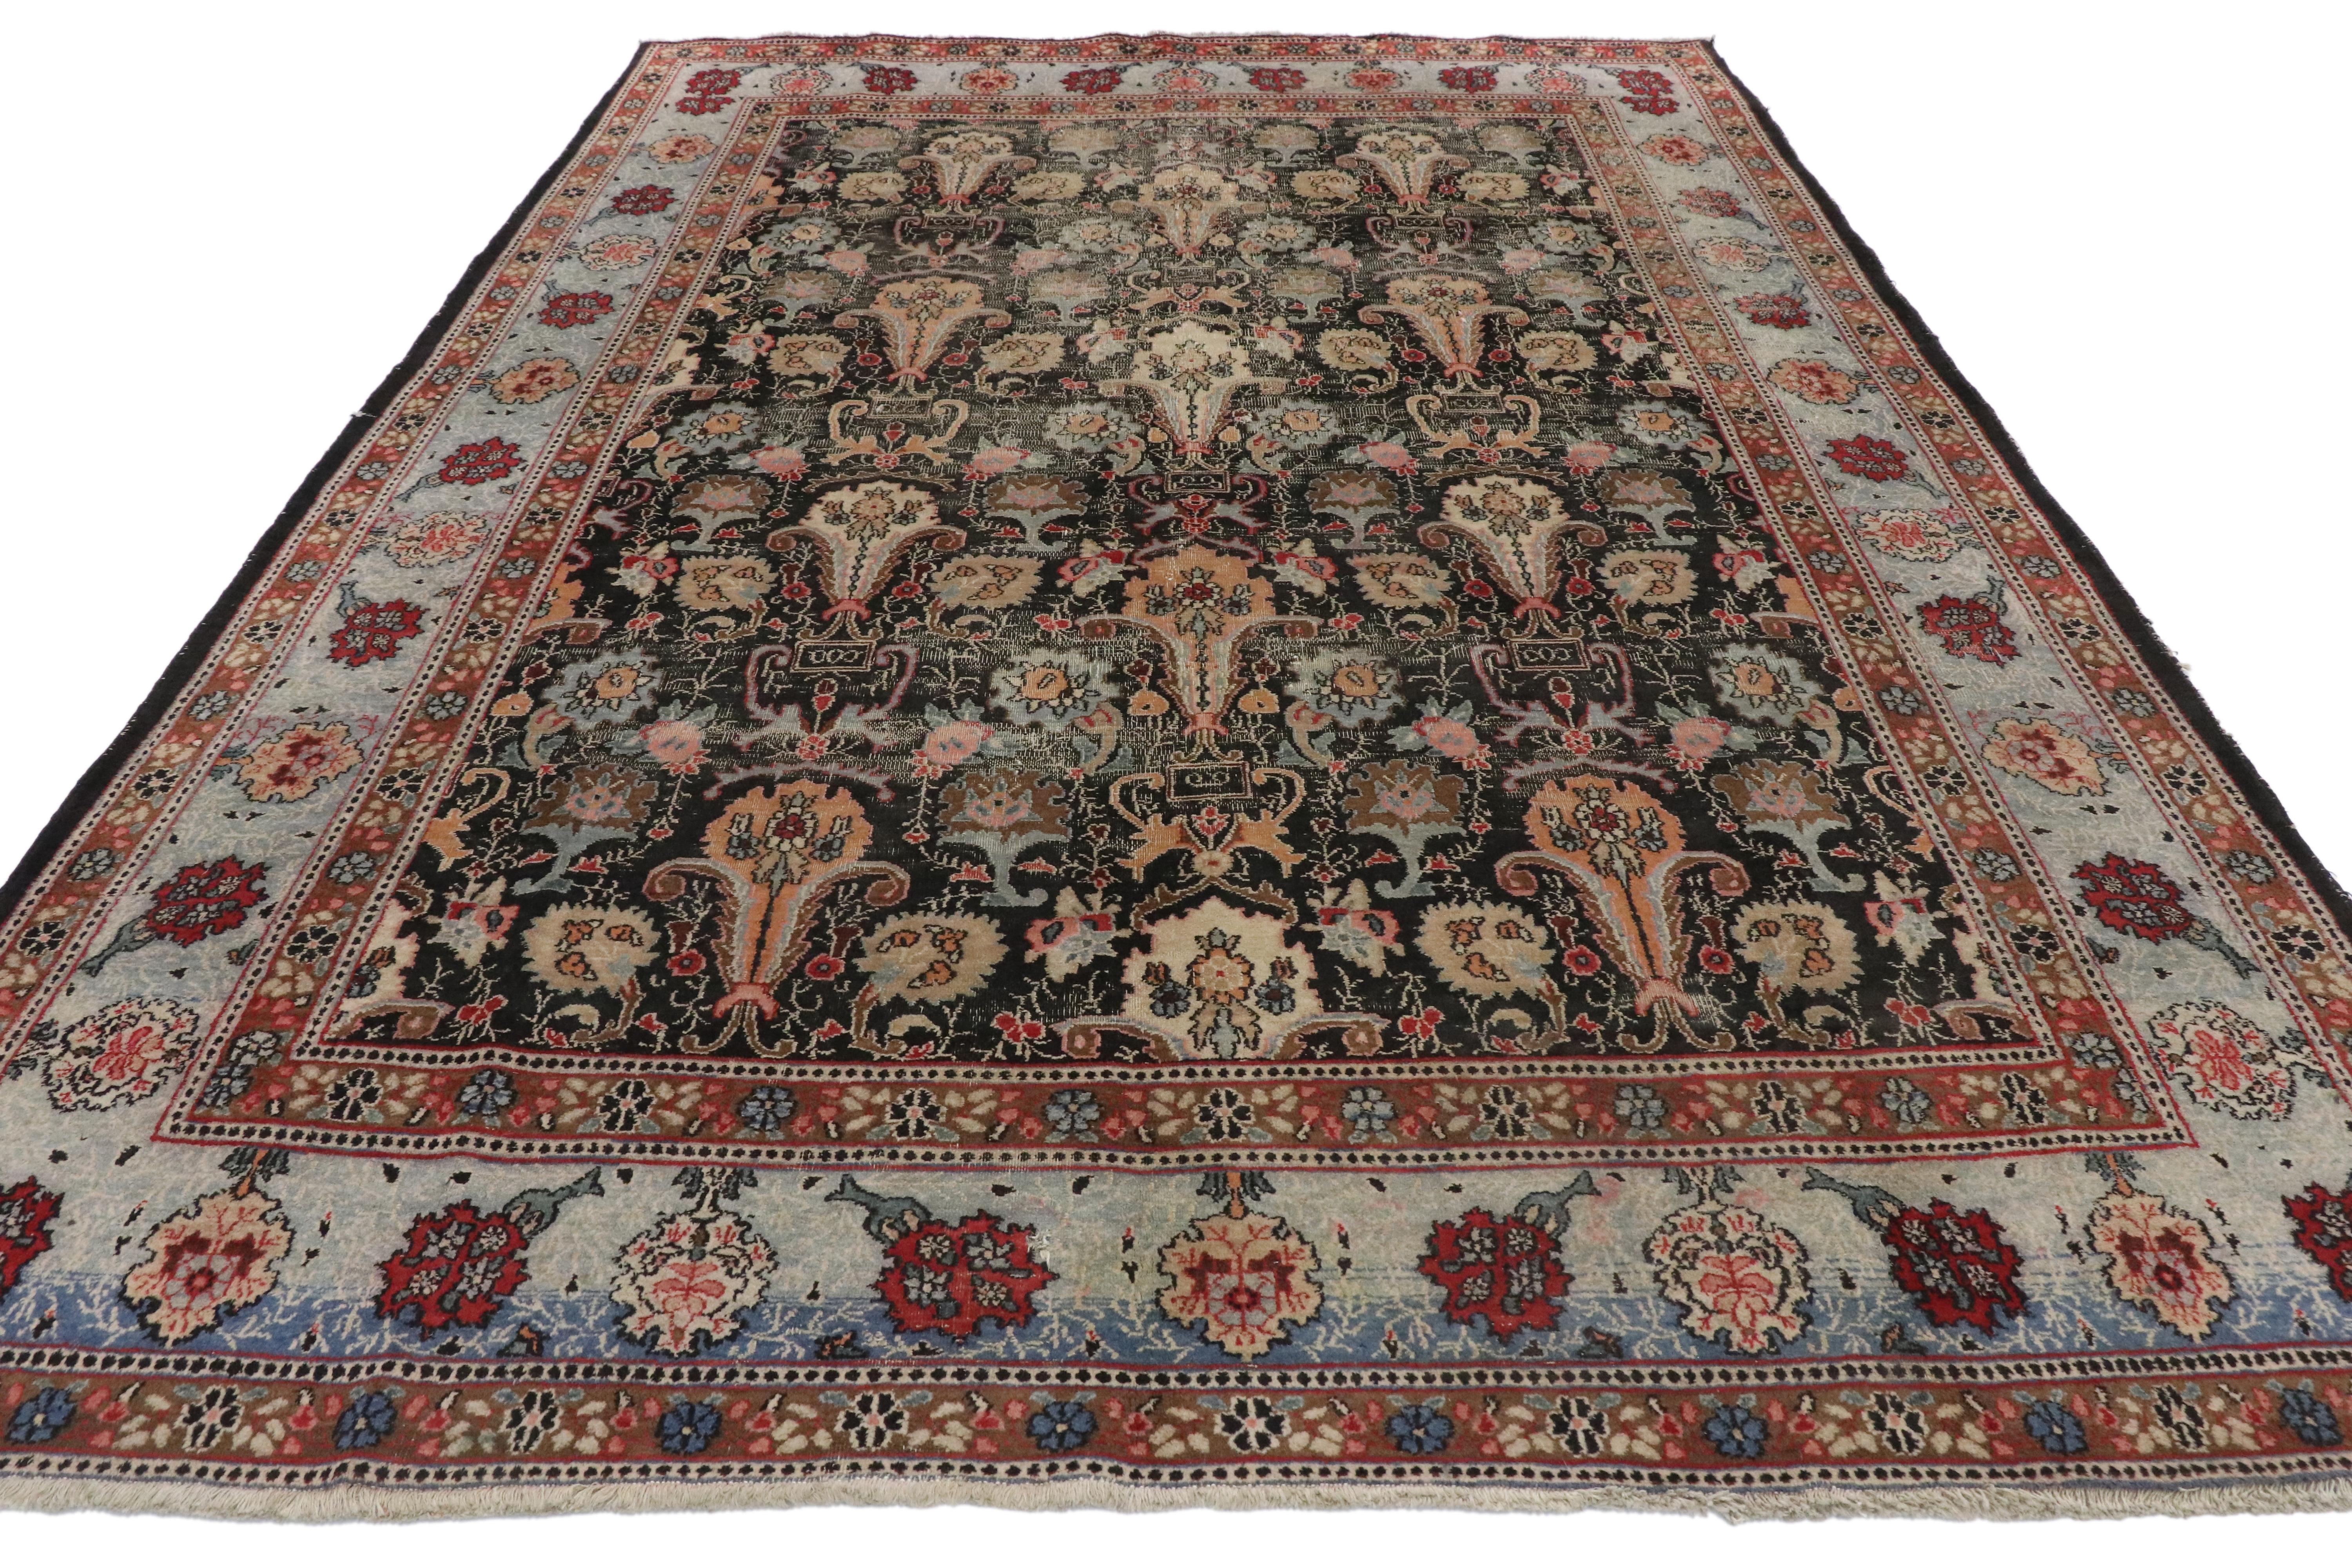 Distressed Antique Persian Khorassan Rug with Rustic American Colonial Style In Distressed Condition For Sale In Dallas, TX